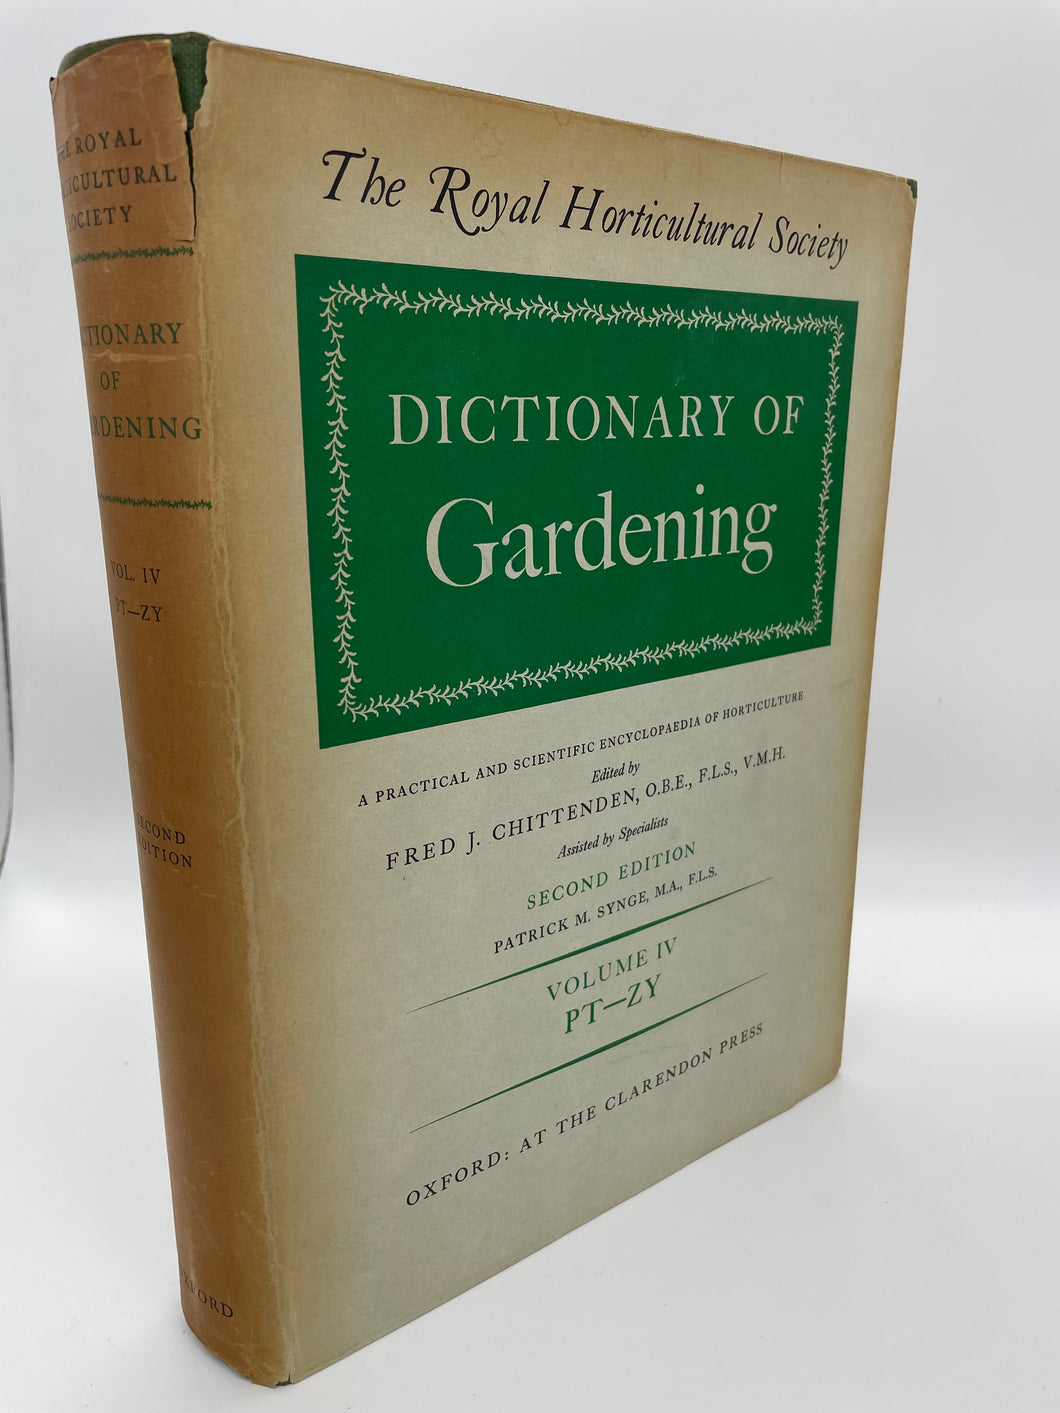 The Royal Horticultural Society Dictionary of Gardening (In Four Volumes)